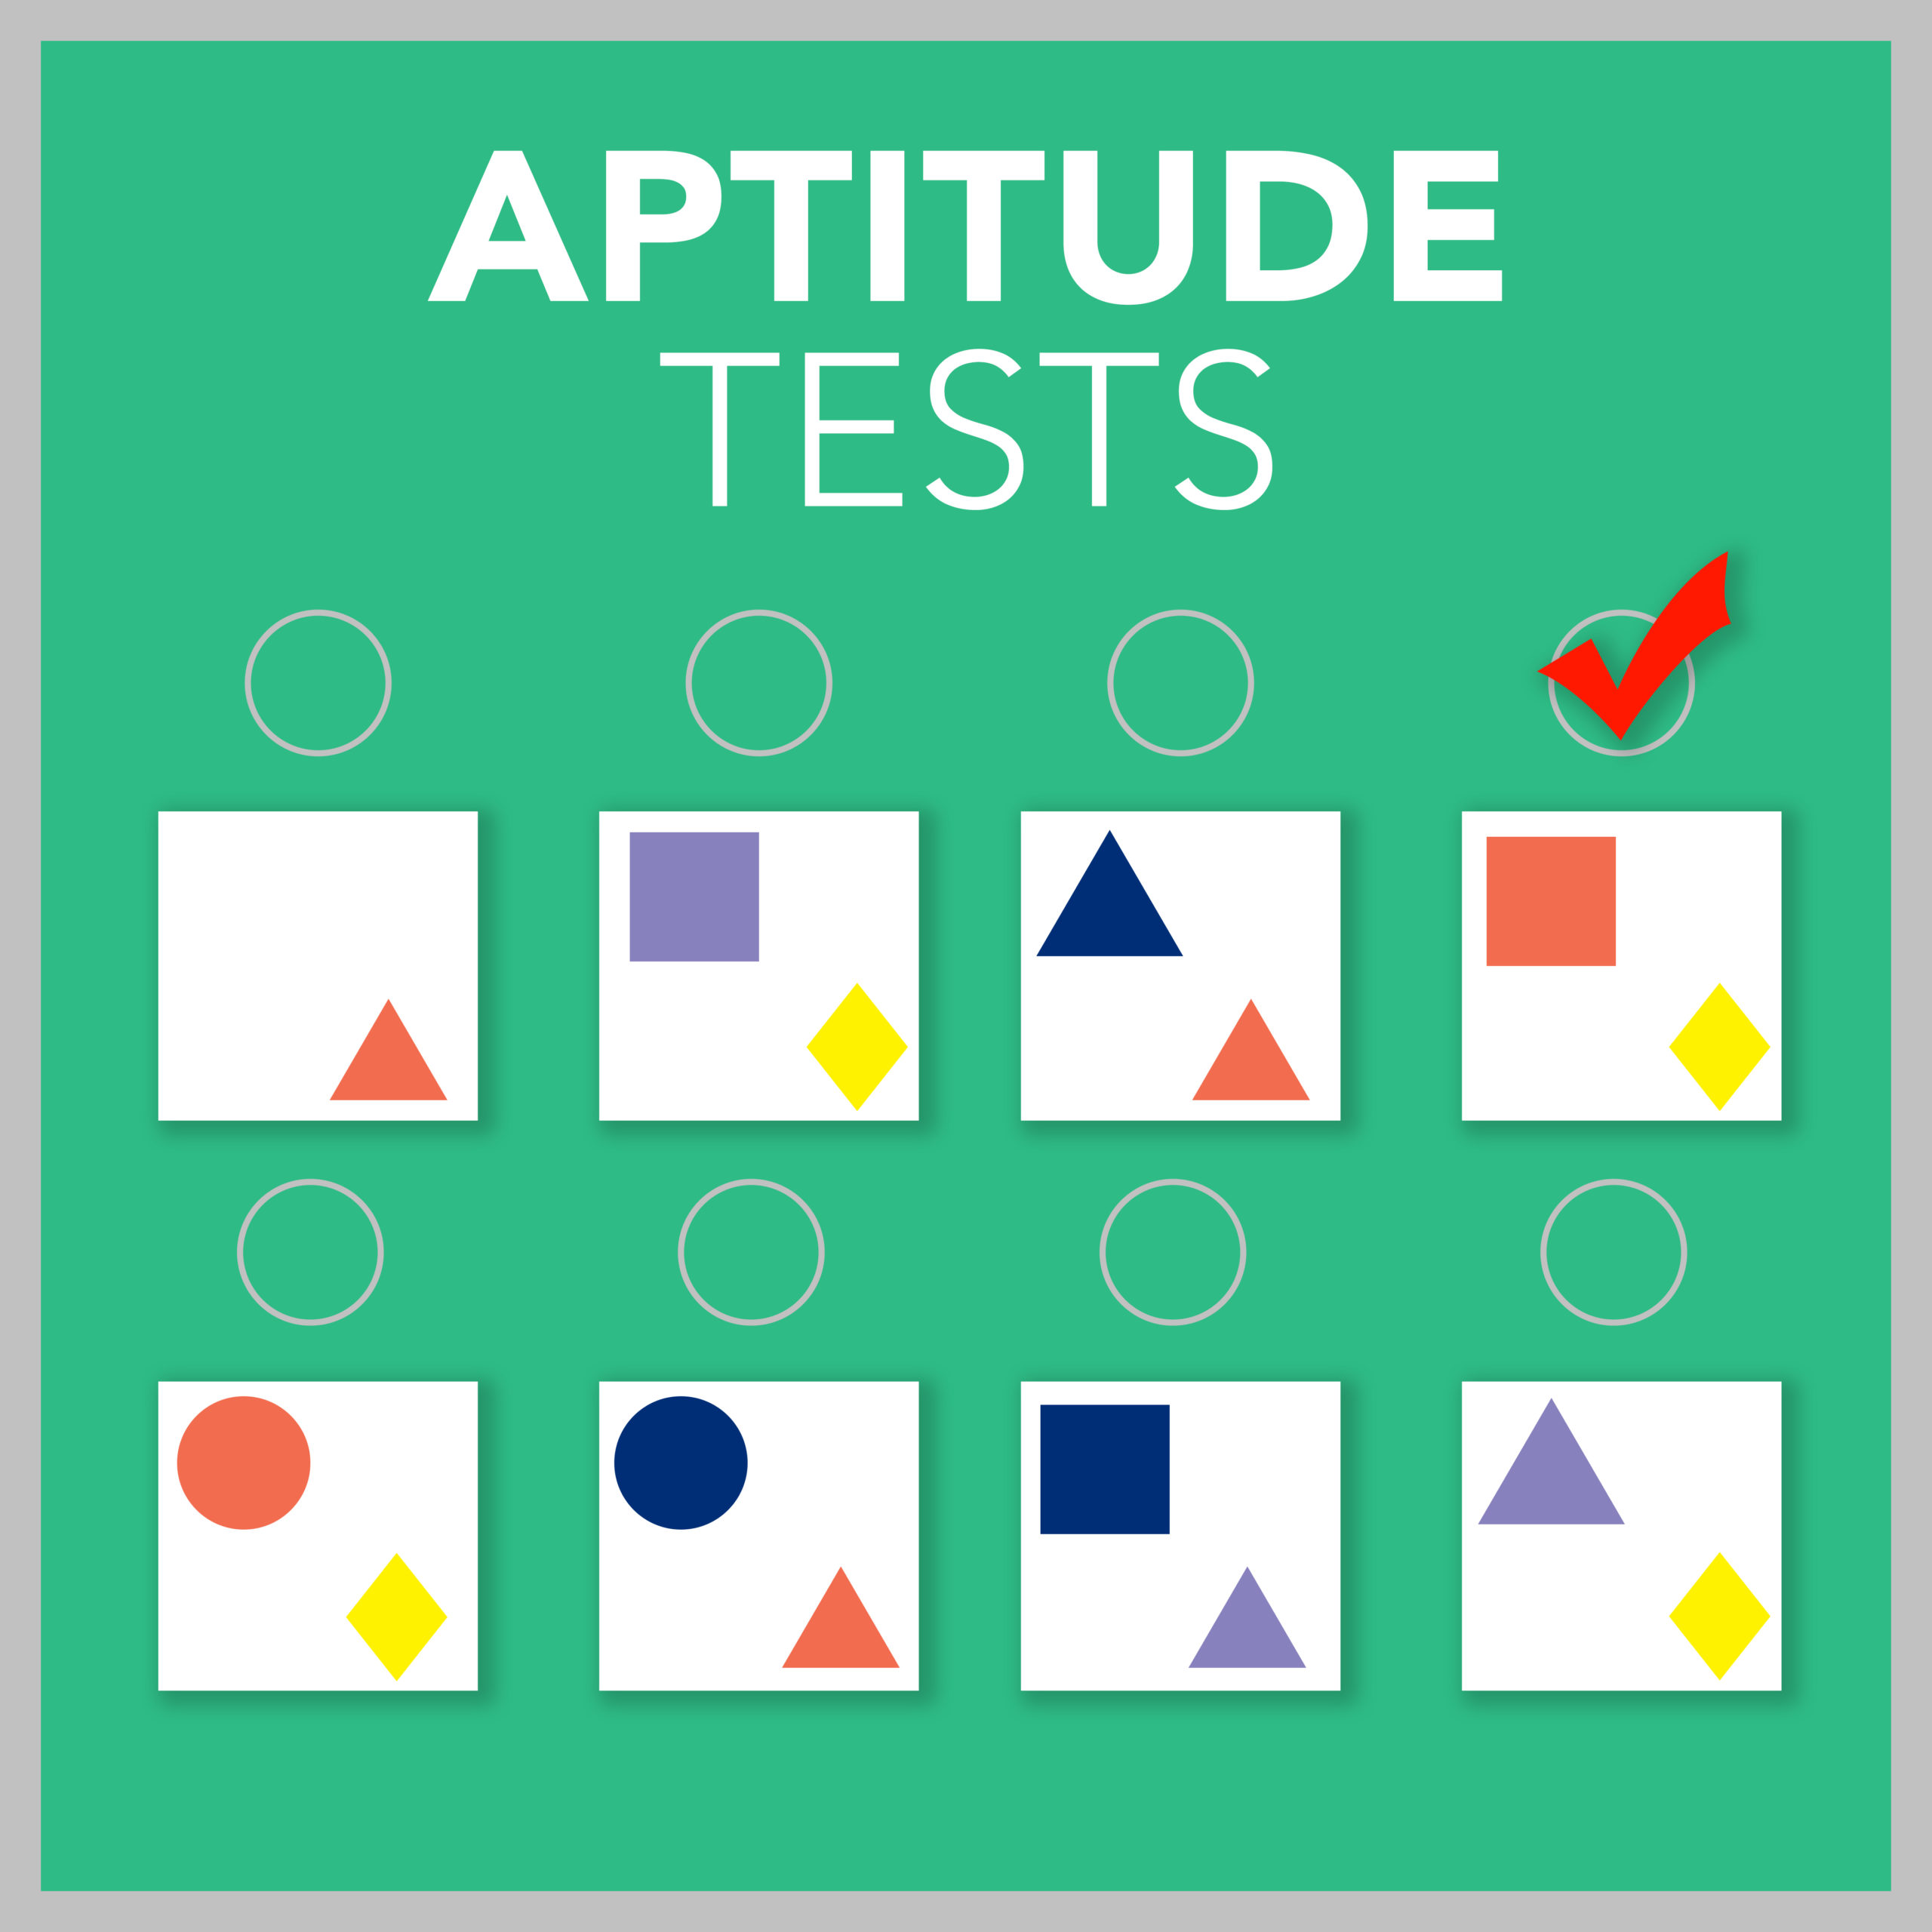 top-8-tips-to-pass-your-pre-employment-aptitude-test